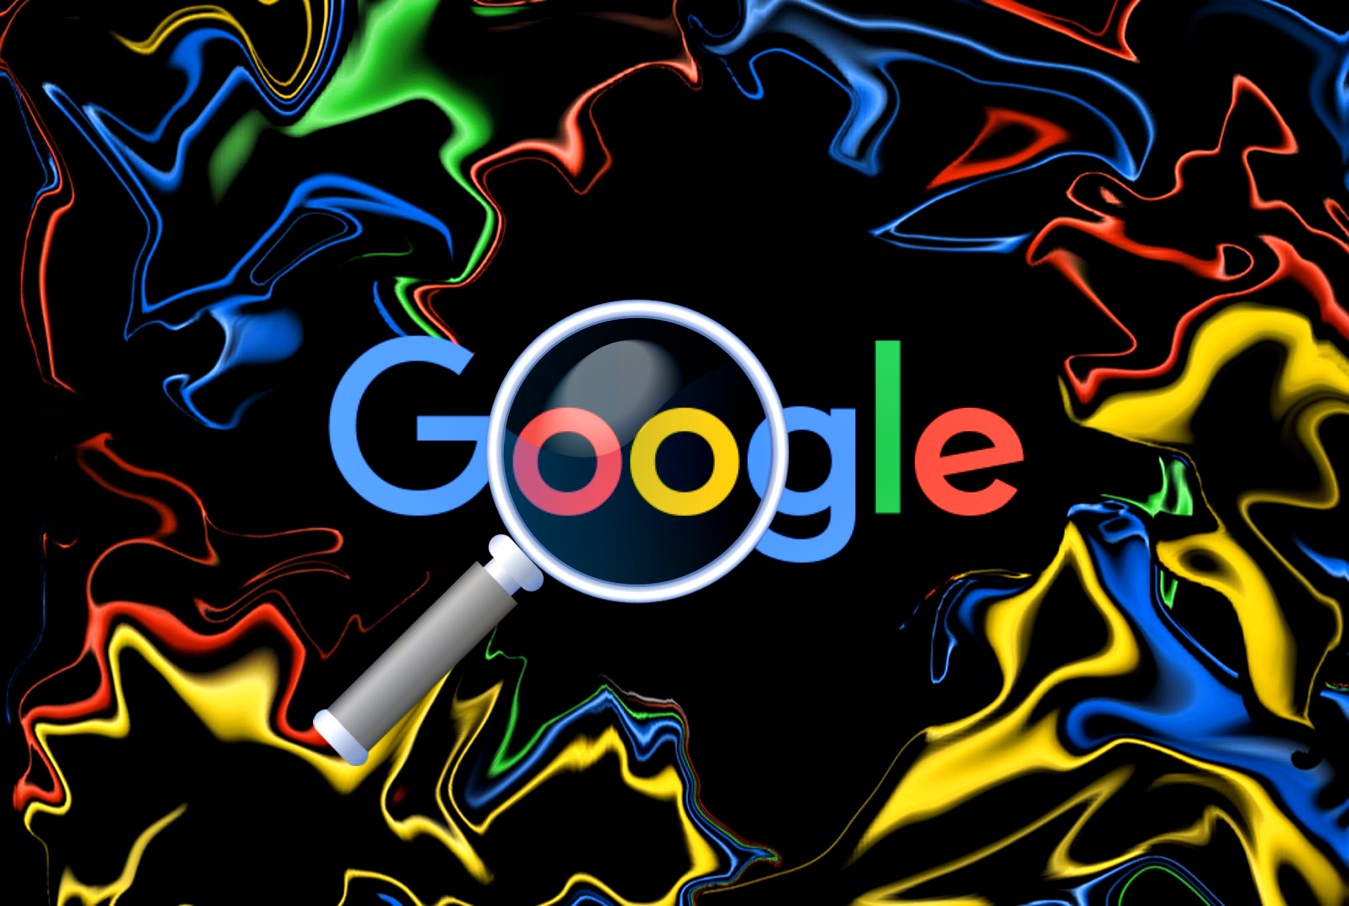 Google URL Inspection Tool flaw lets anyone inspect URLs without authorization